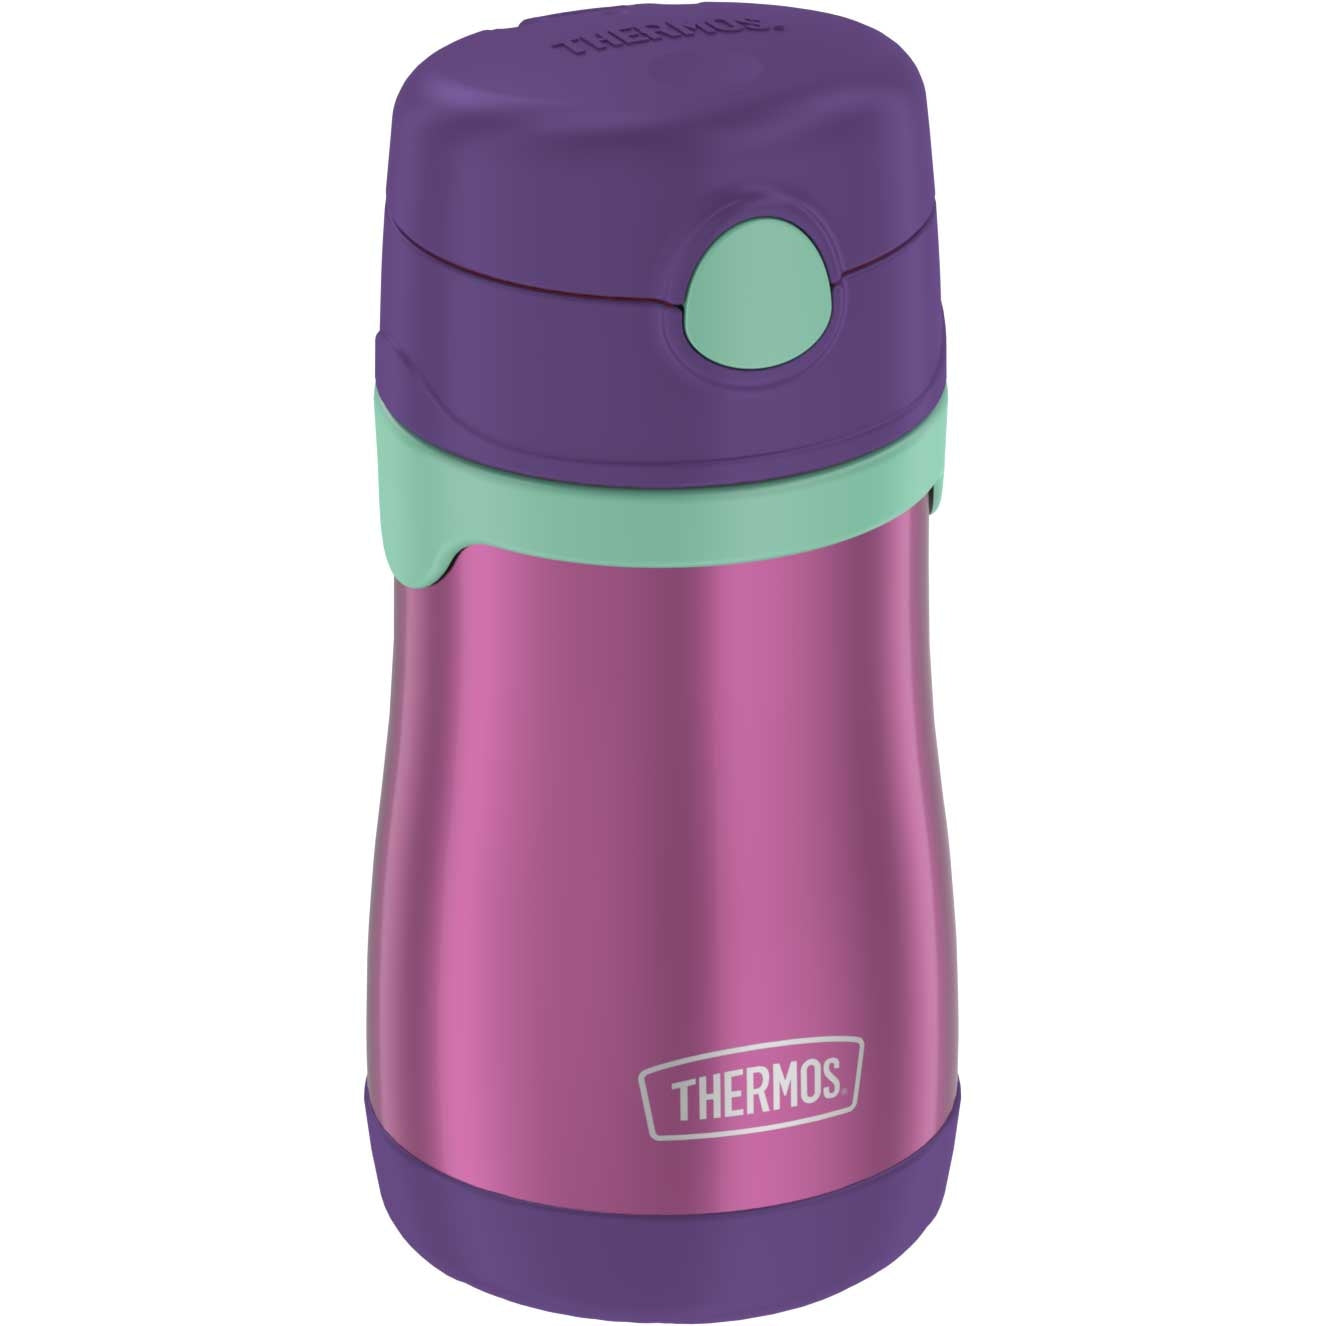 Thermos Kids 14 oz. Funtainer Insulated Stainless Steel Water Bottle - Gray